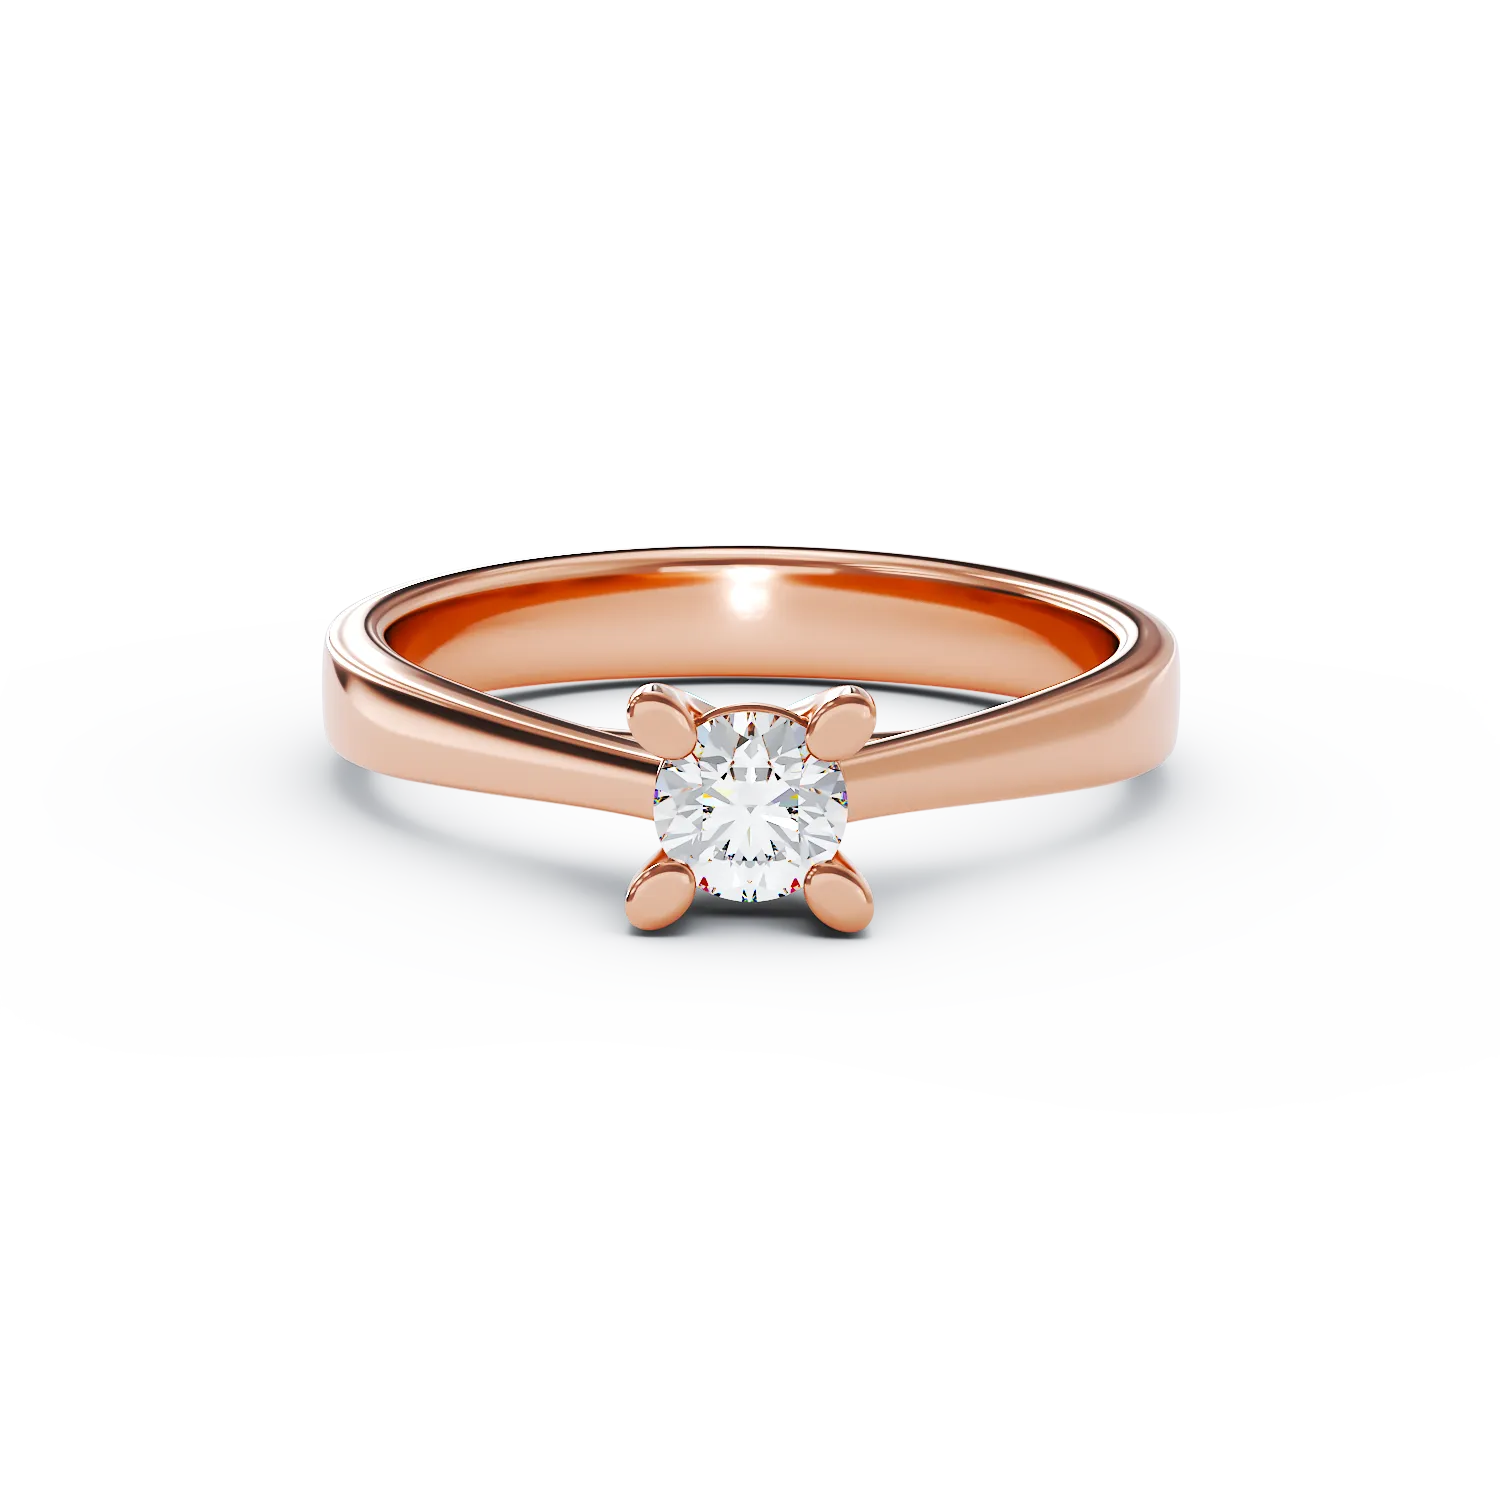 18K rose gold engagement ring with a 0.15ct solitaire diamond